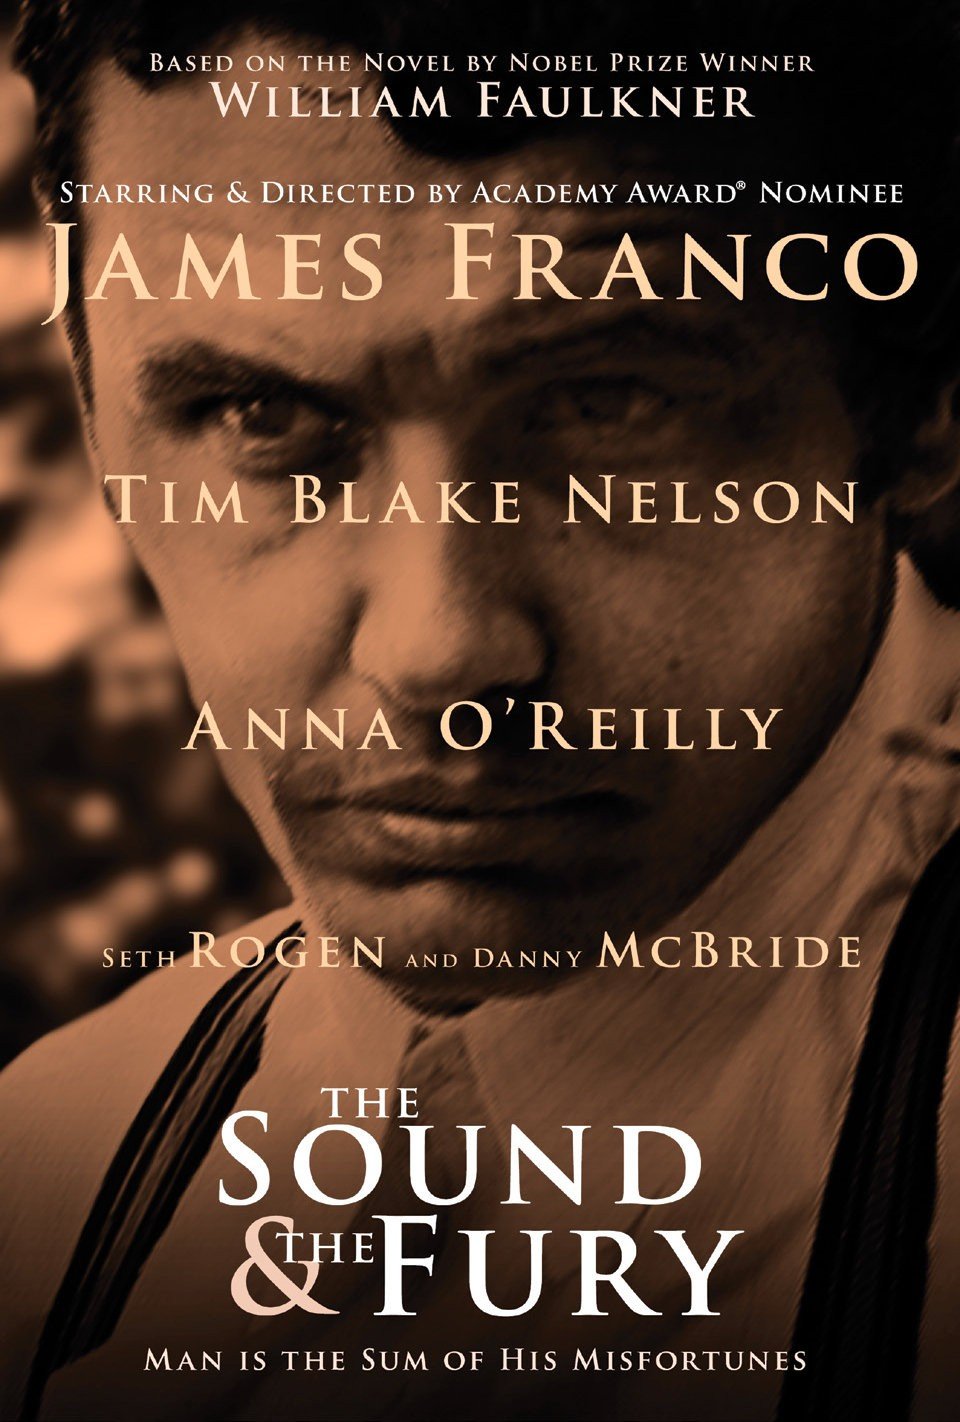 sound and fury movie review